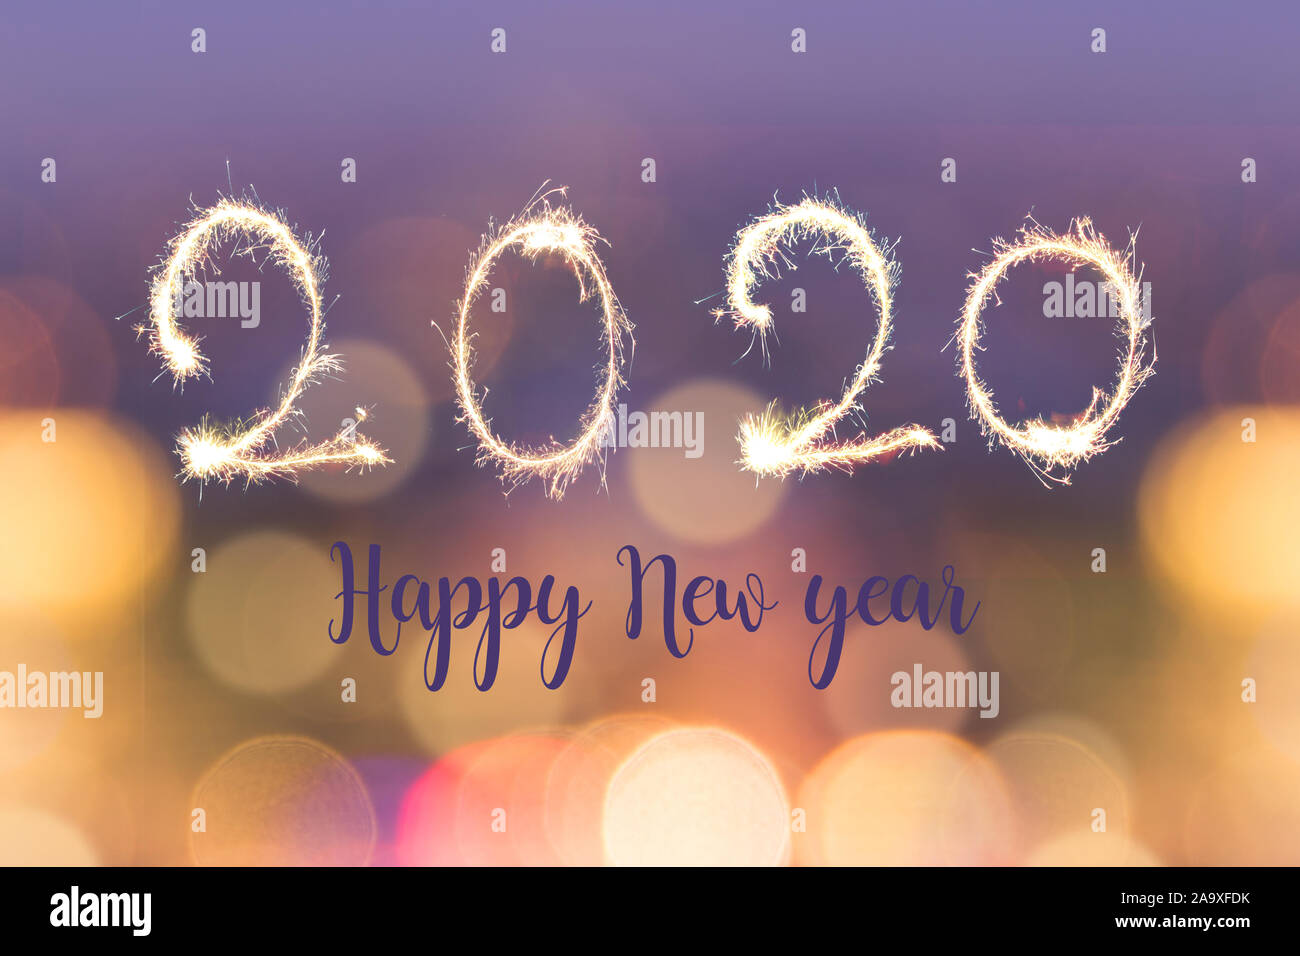 Happy new year 2020 written with sparkes on blurred bokeh lights background, holiday greeting card Stock Photo